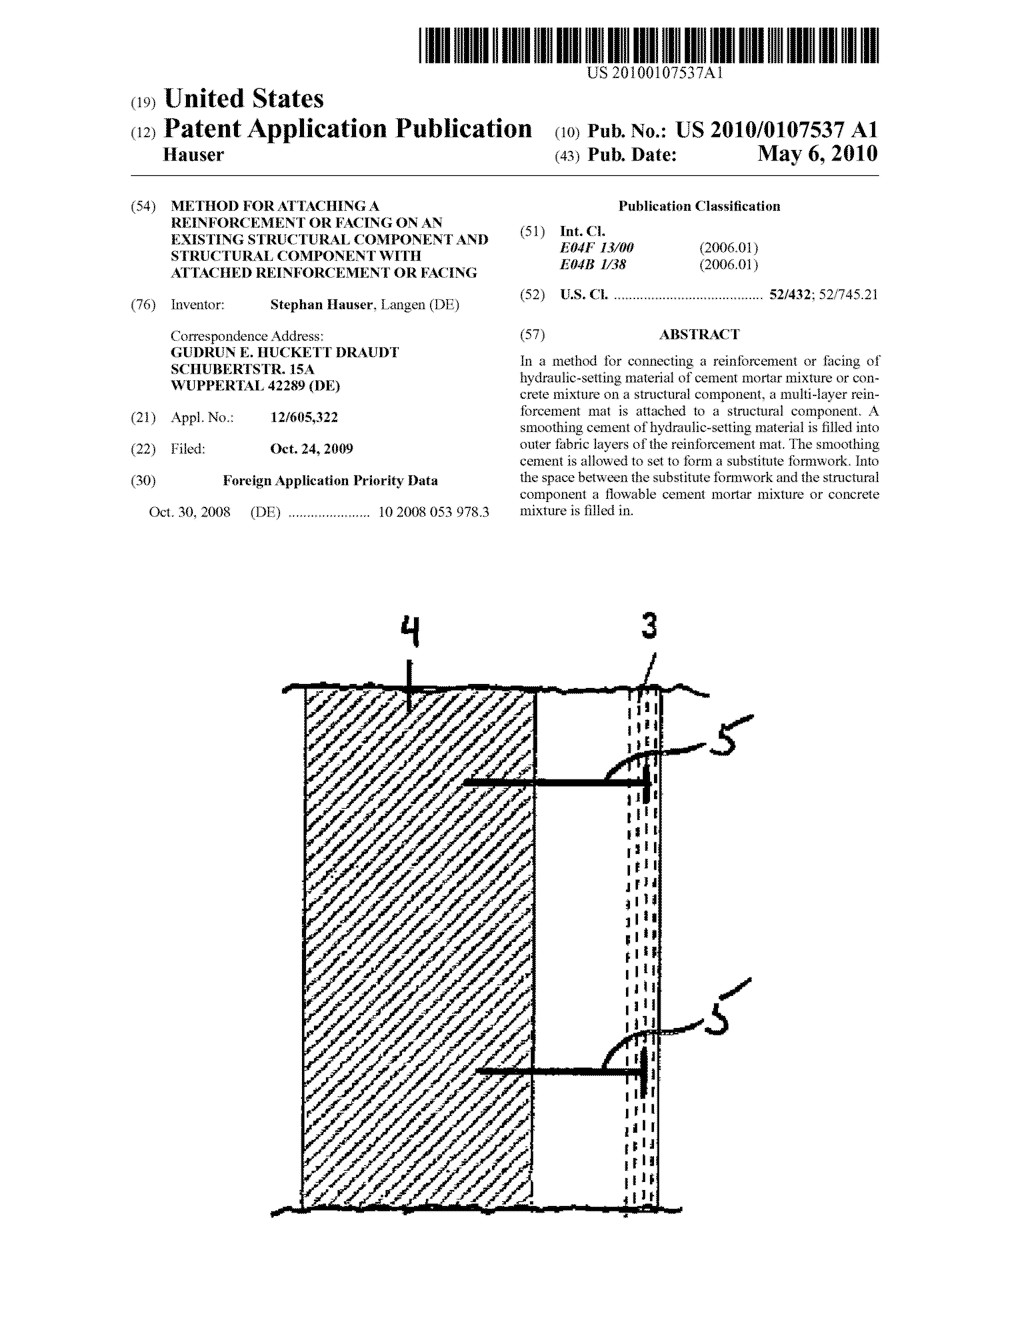 Method for Attaching a Reinforcement or Facing on an Existing Structural Component and Structural Component with Attached Reinforcement or Facing - diagram, schematic, and image 01